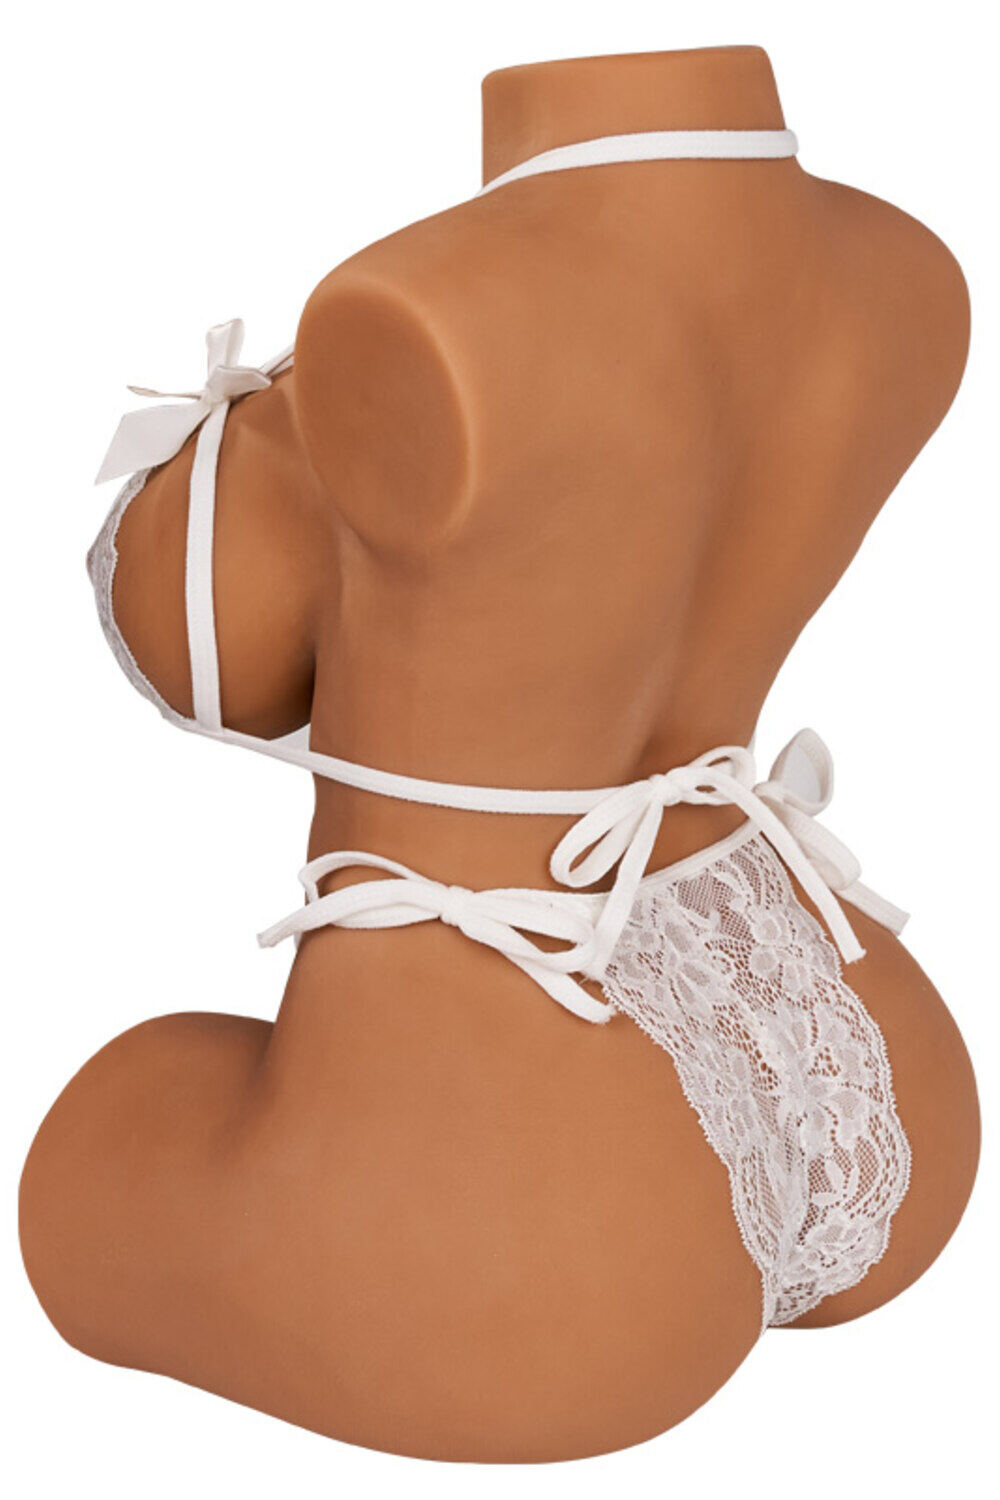 Mara Pretty 48.5cm(1ft7) G-Cup Tantaly Sex Real Doll (In Stock) image11